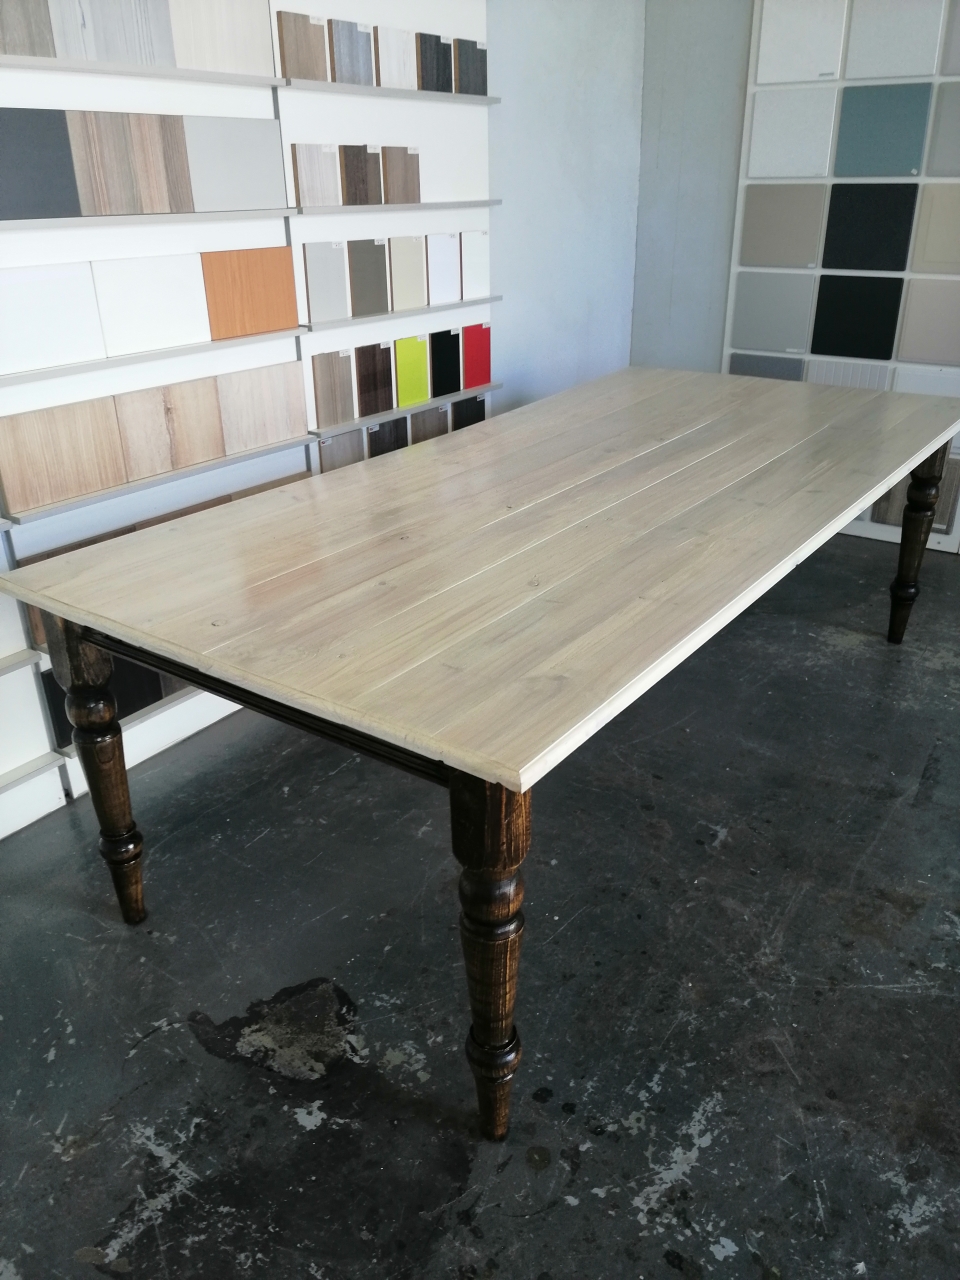 DINING ROOM OR LAPA TABLE-8 SEATER ASHWOOD LEGS AND WASHED PINE YOP